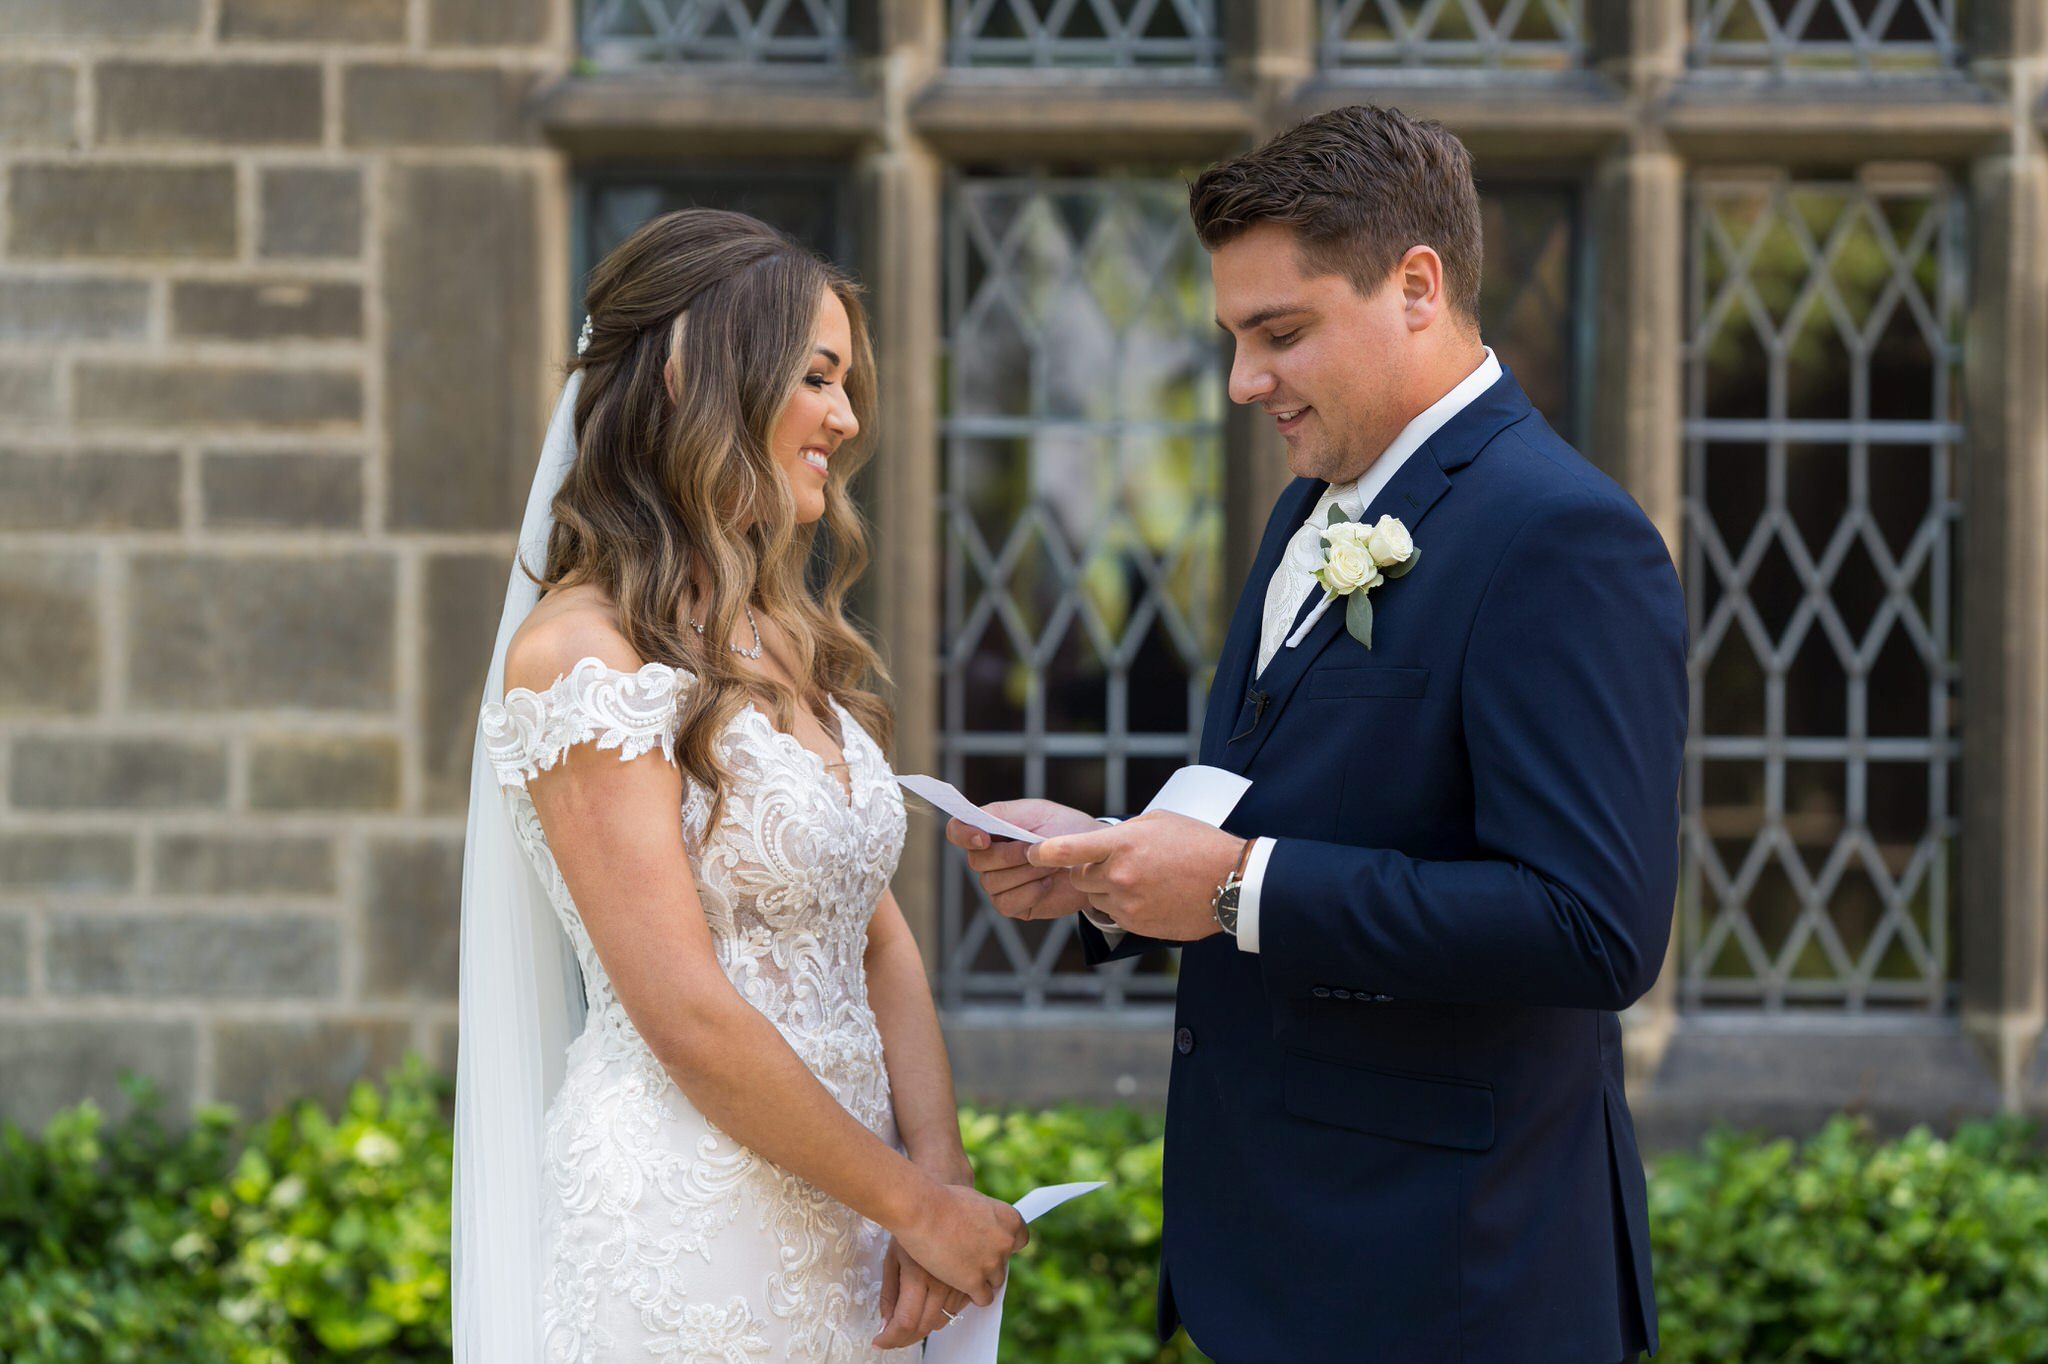 groom reads a letter while a bride smiles and looks at him